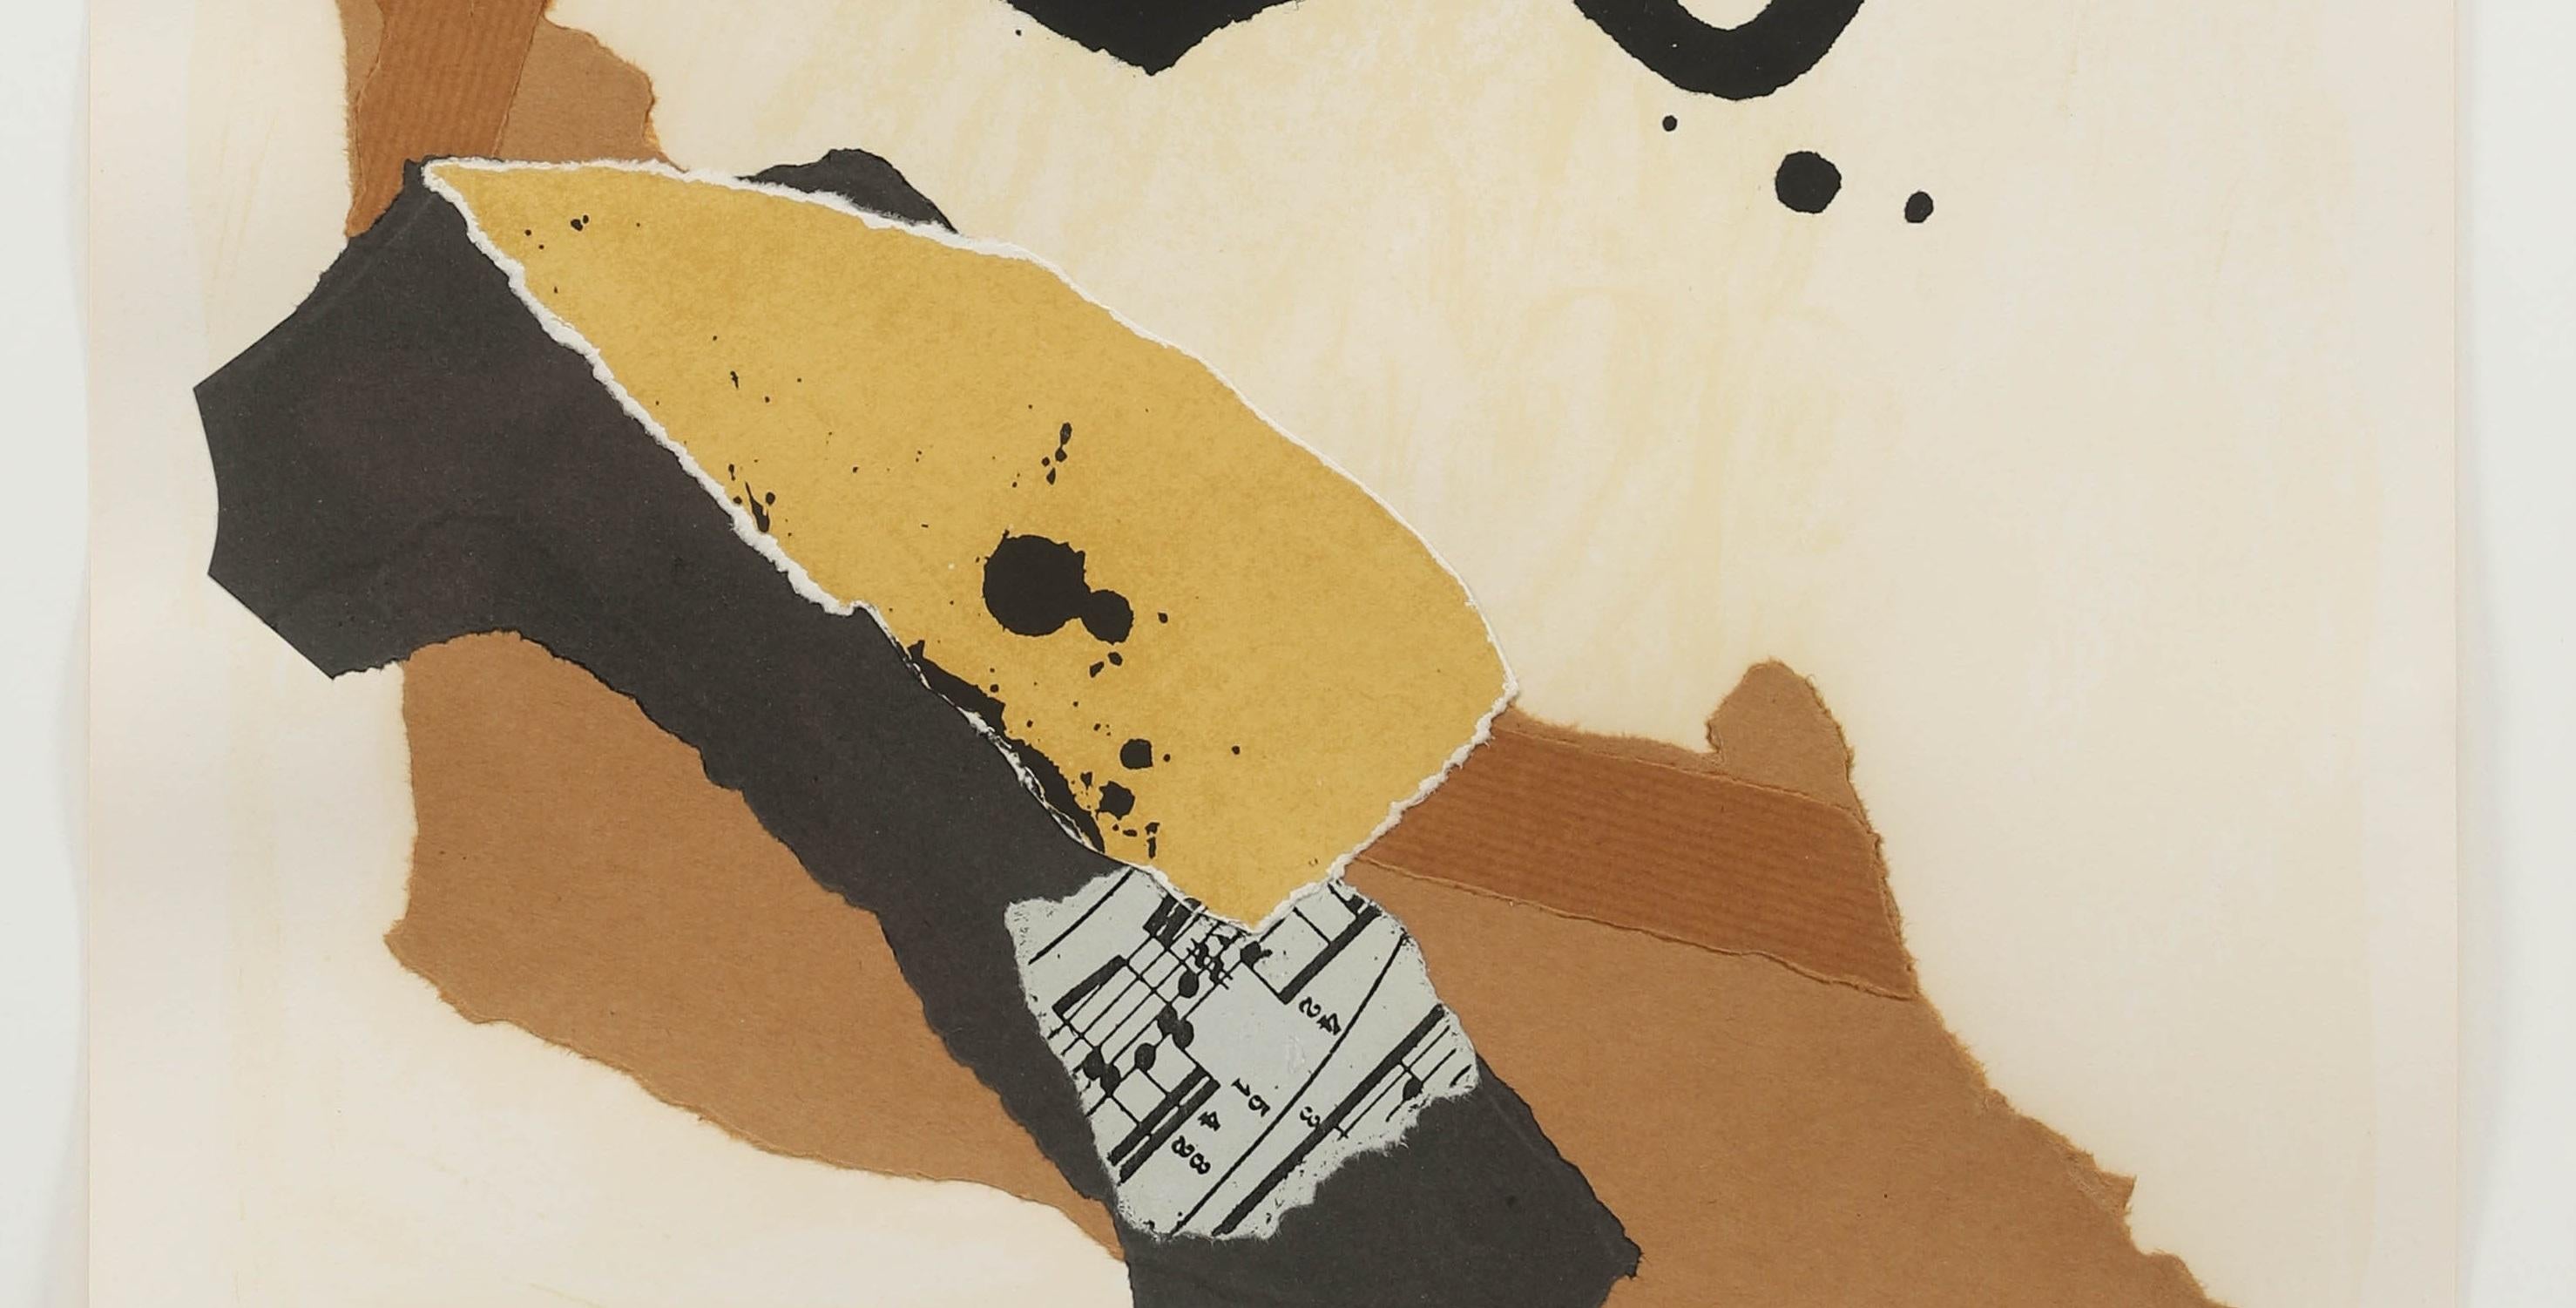 Abstract Gesture Expresionism Collage New York Motherwell Black Musical Modern - Print by Robert Motherwell